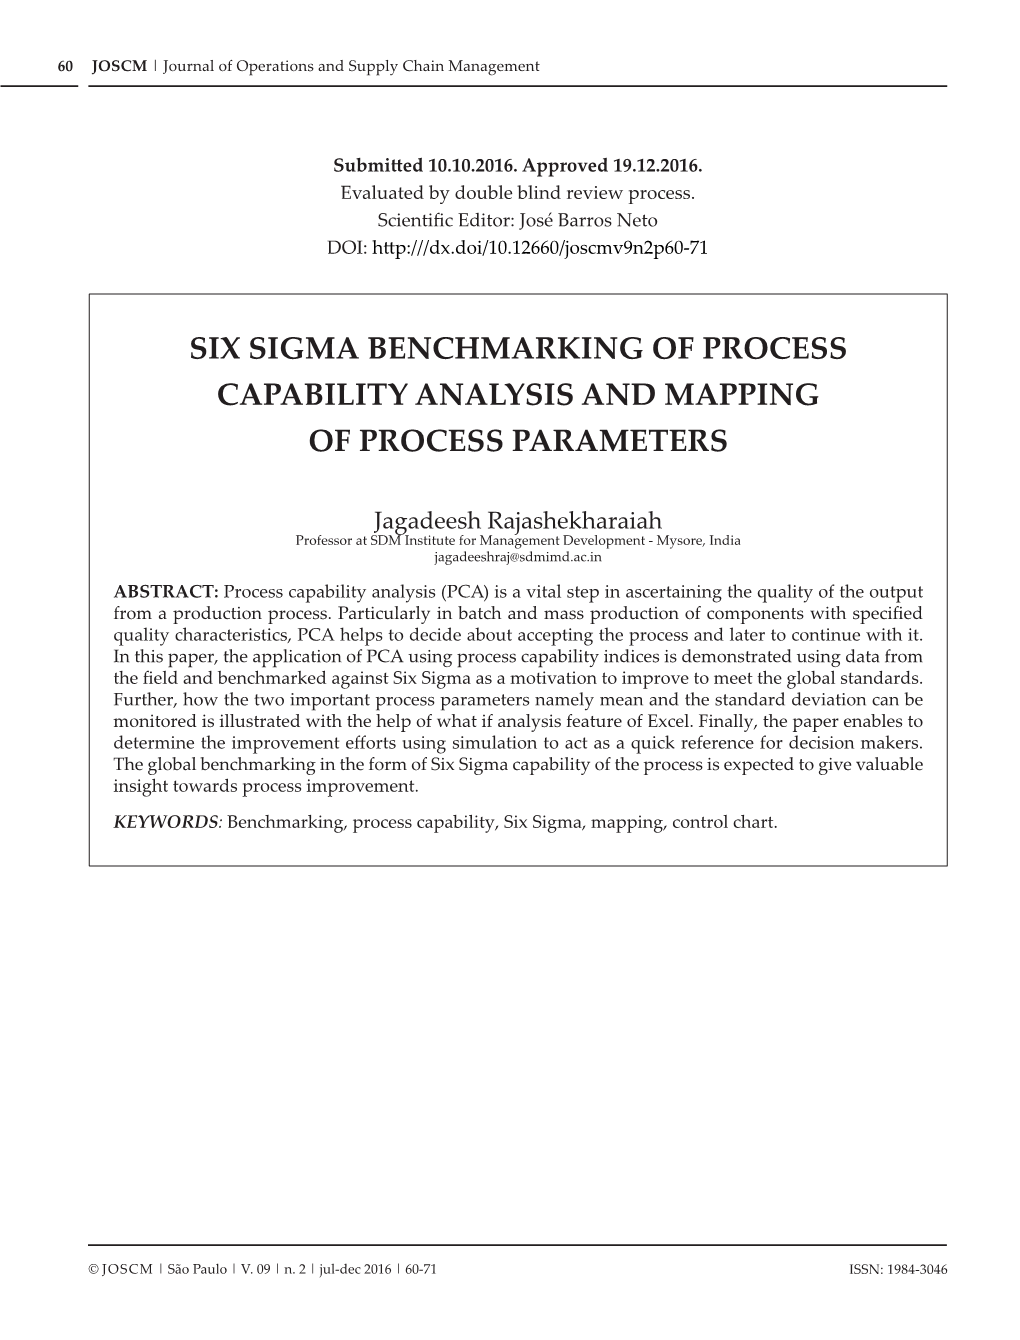 Six Sigma Benchmarking of Process Capability Analysis and Mapping of Process Parameters